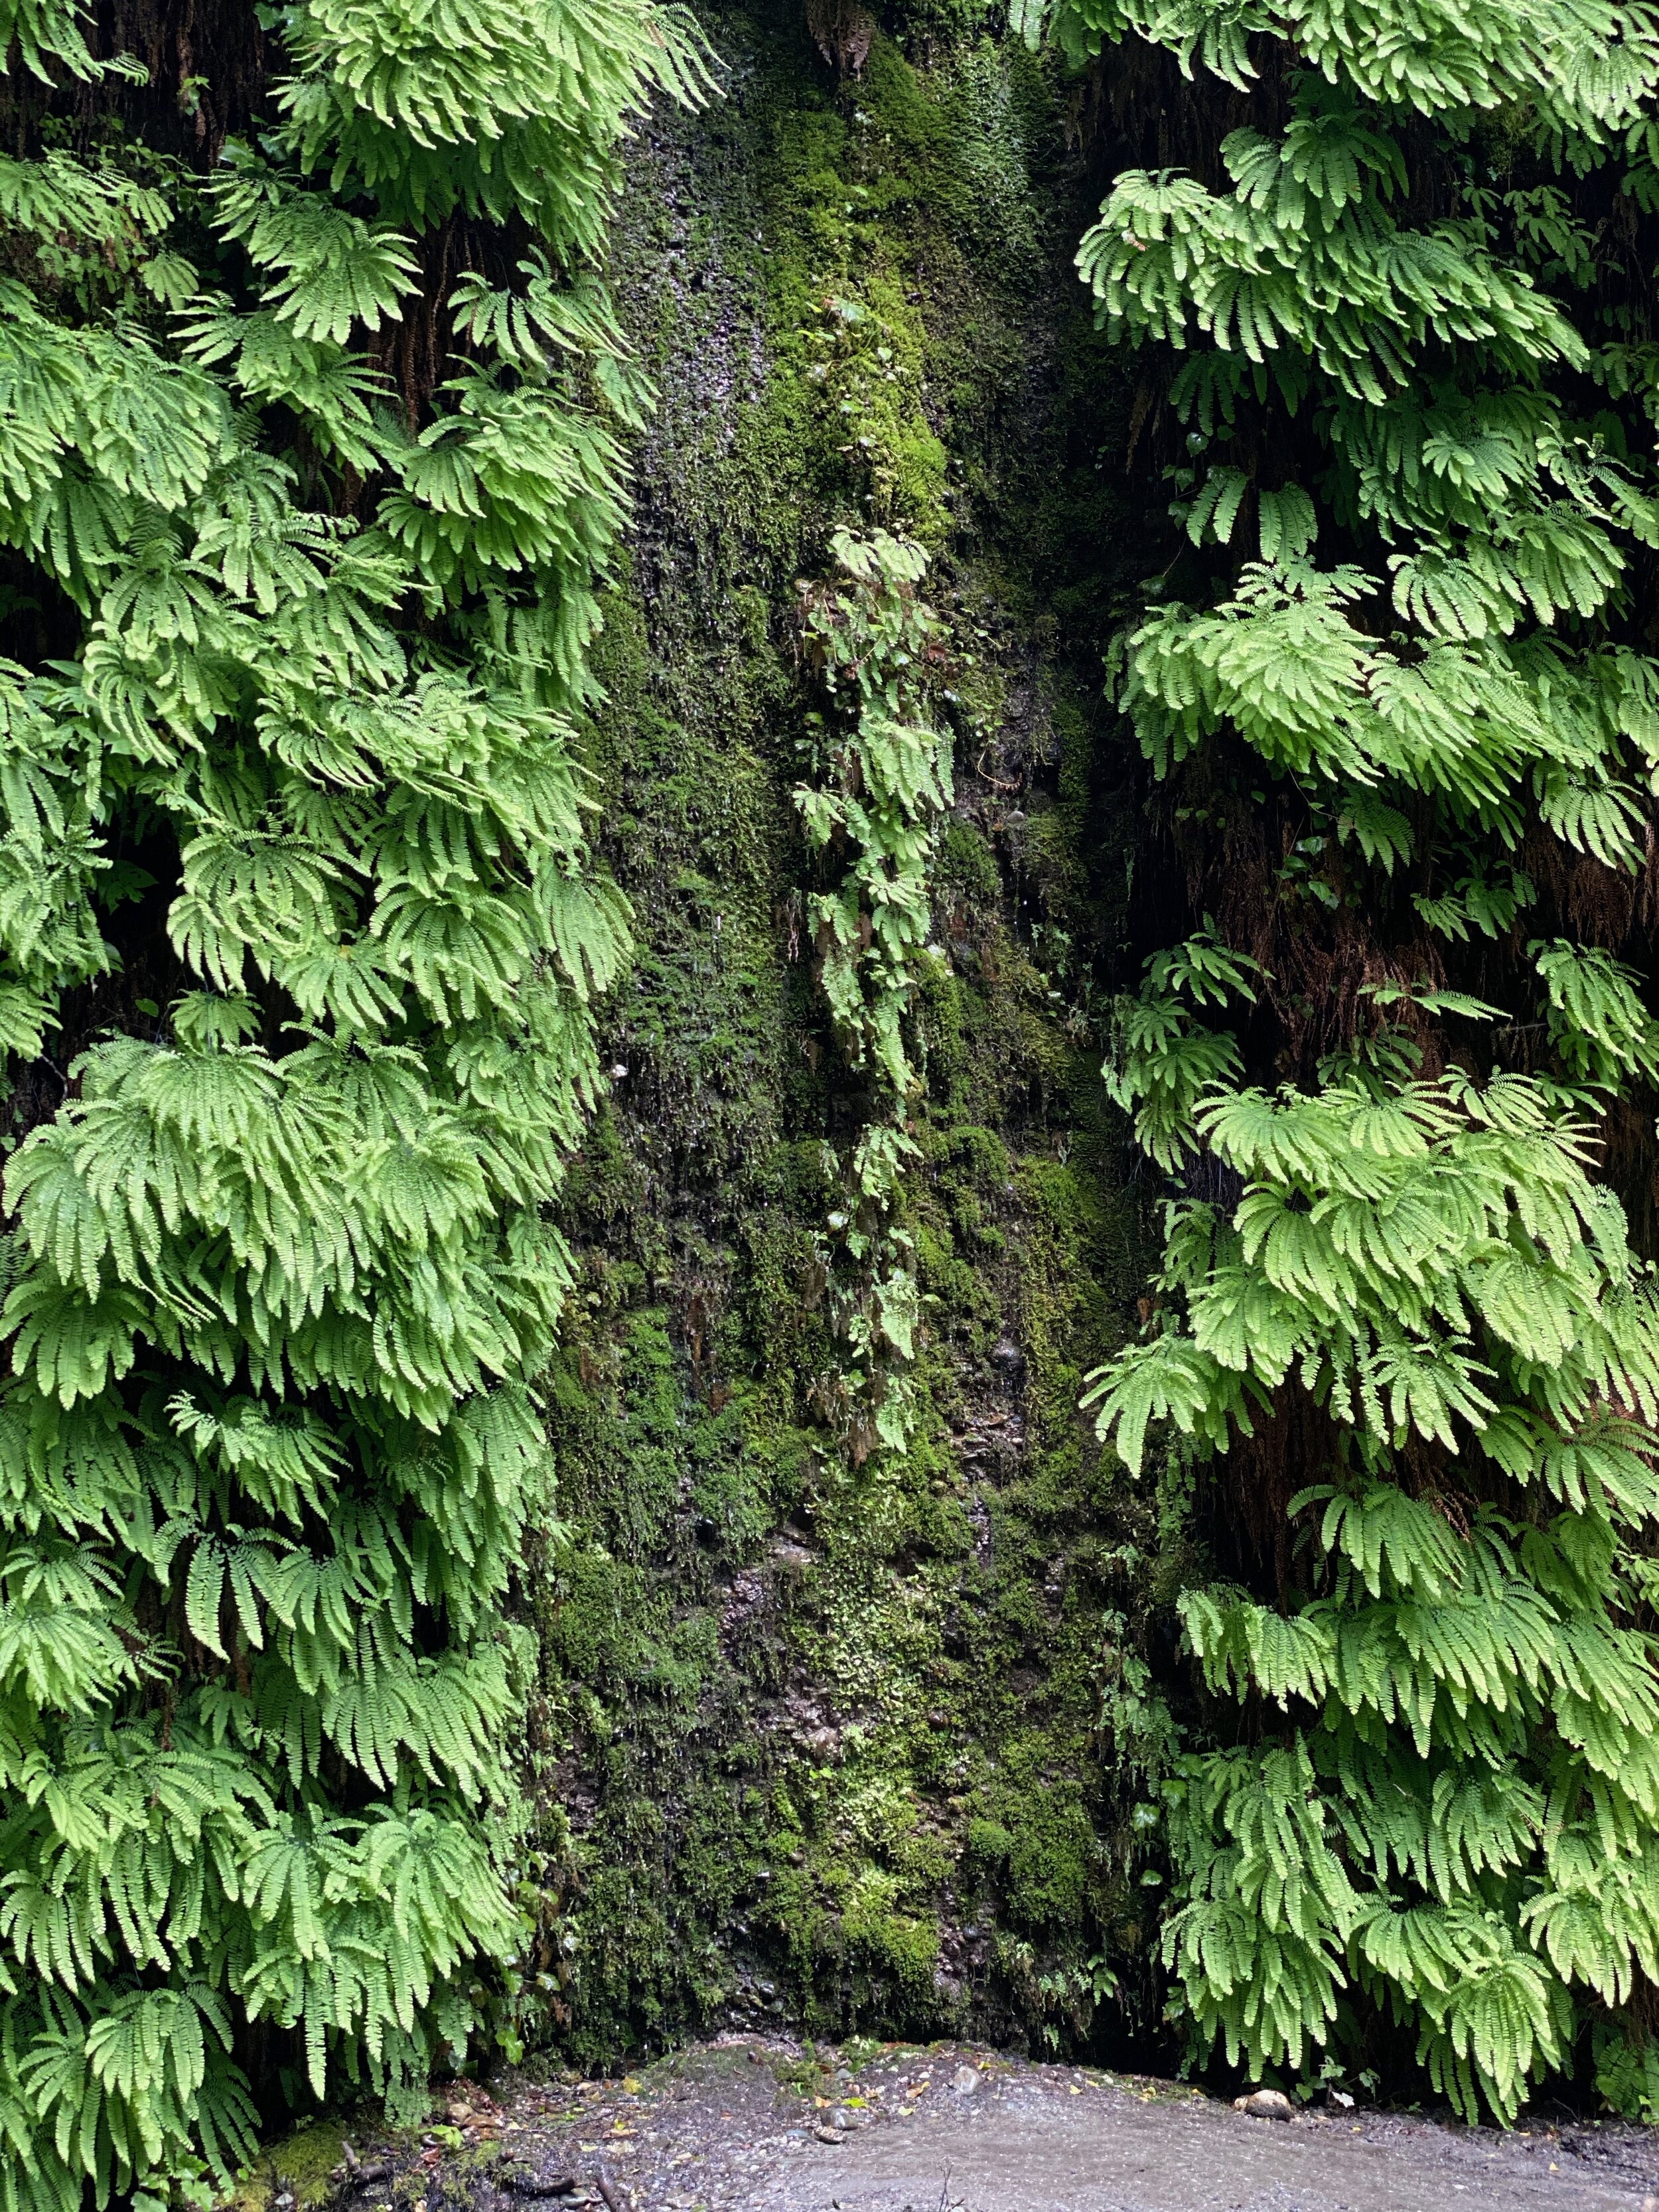 One weeping section of wall with ferns and moss in Fern Canyon.  Photo by Karen Boudreaux, June 12, 2021